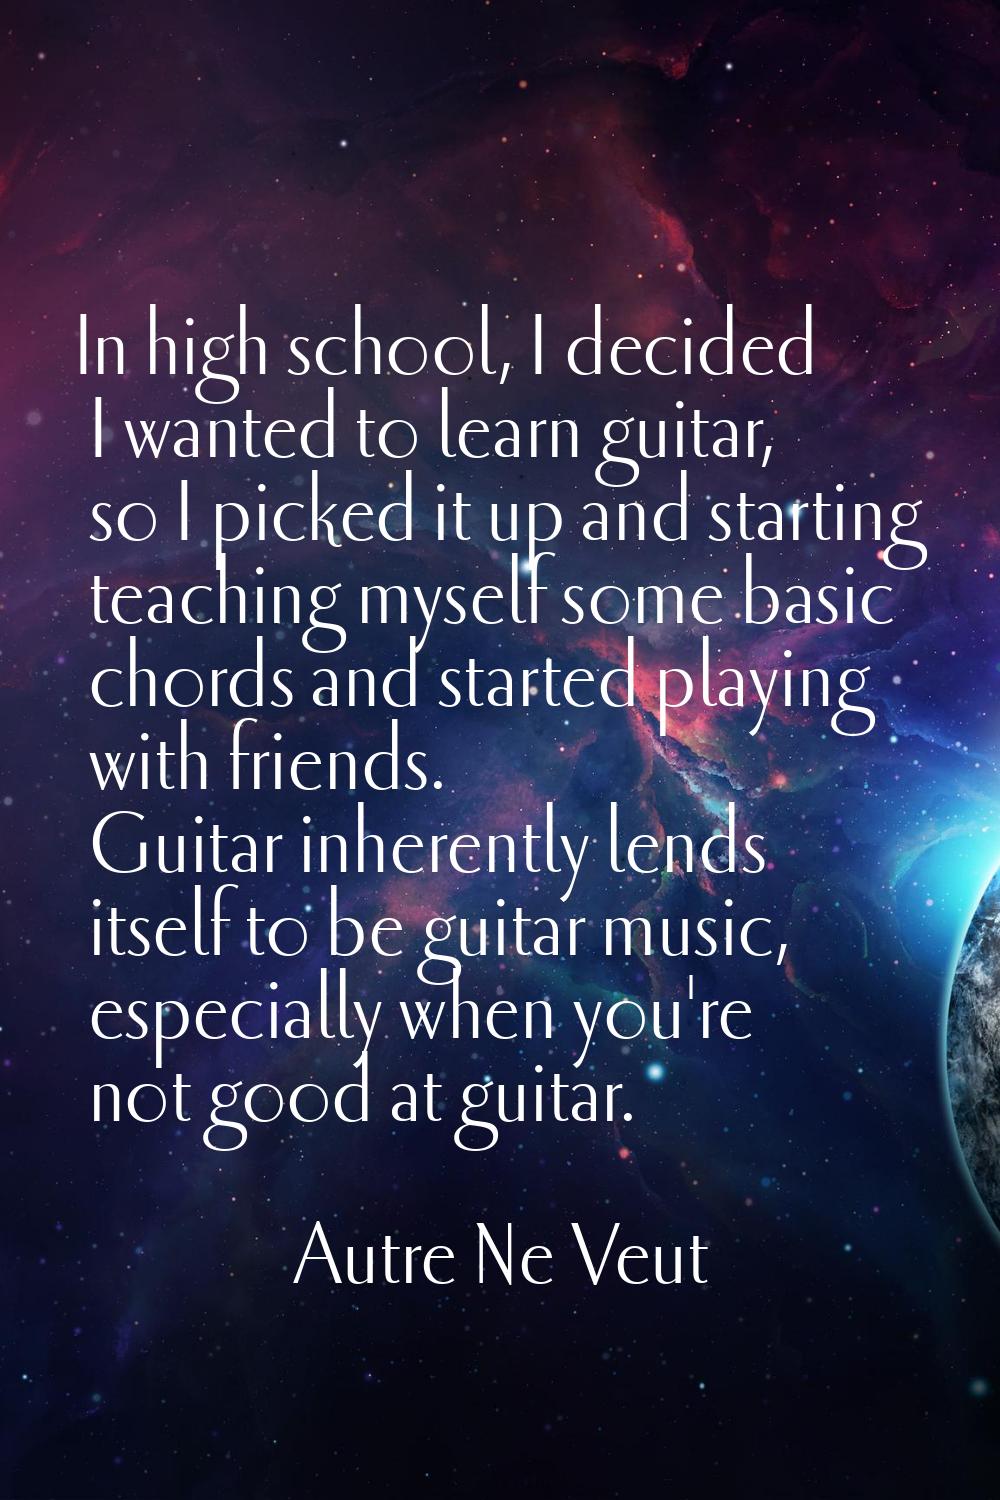 In high school, I decided I wanted to learn guitar, so I picked it up and starting teaching myself 